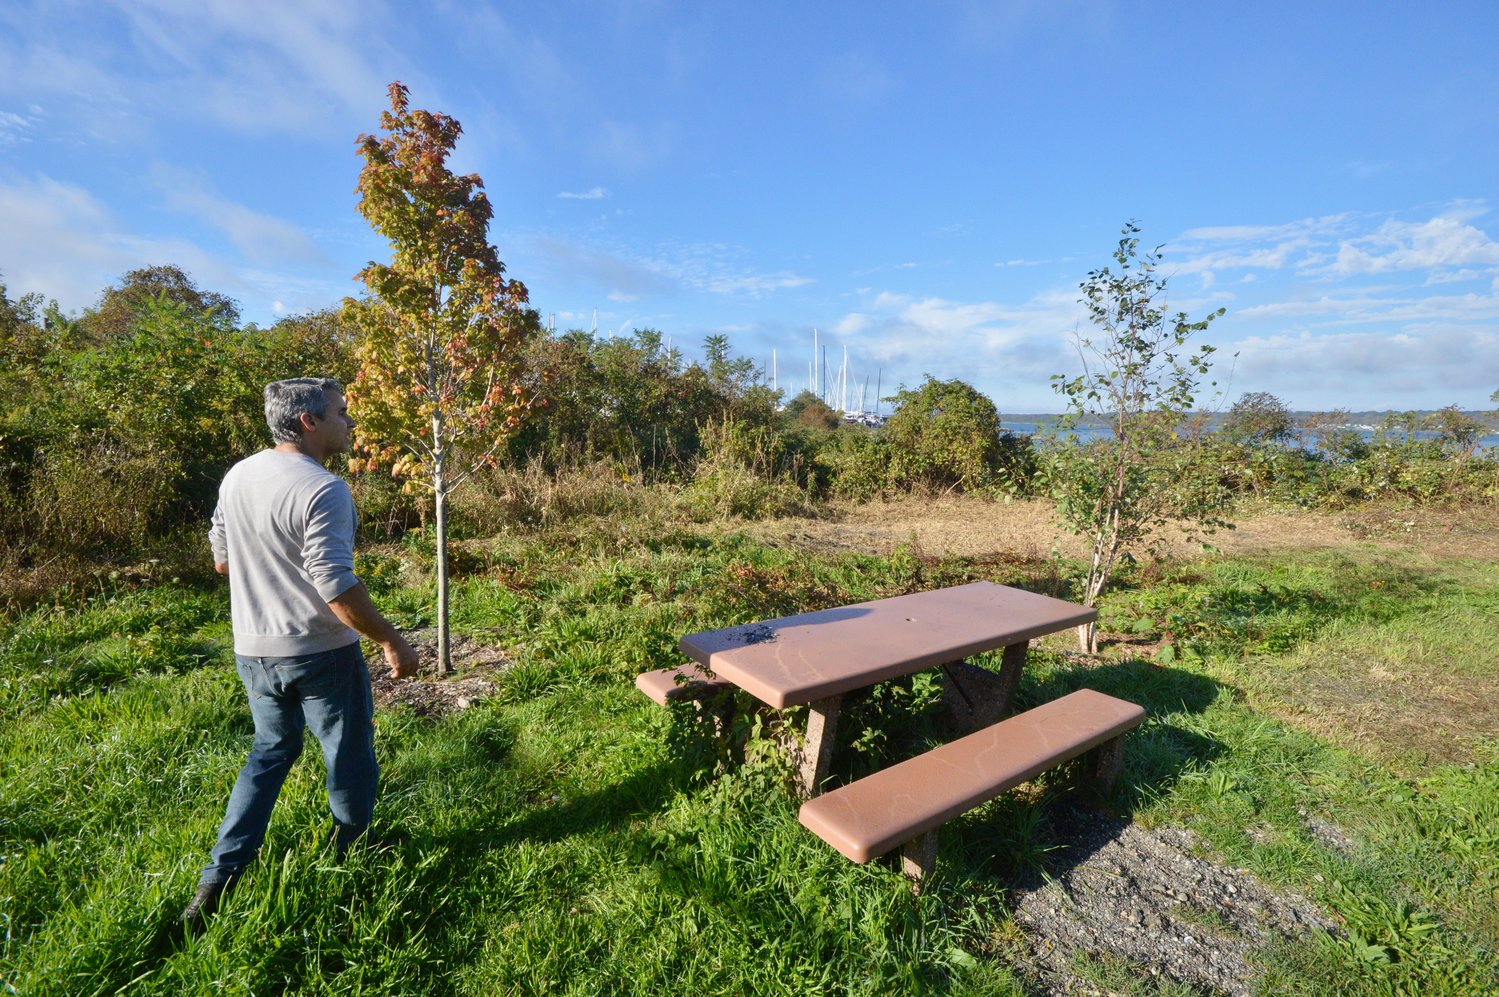 The Girl Scouts donated this picnic table at the bottom of Mott Farm Road, which offers a view of the bay.